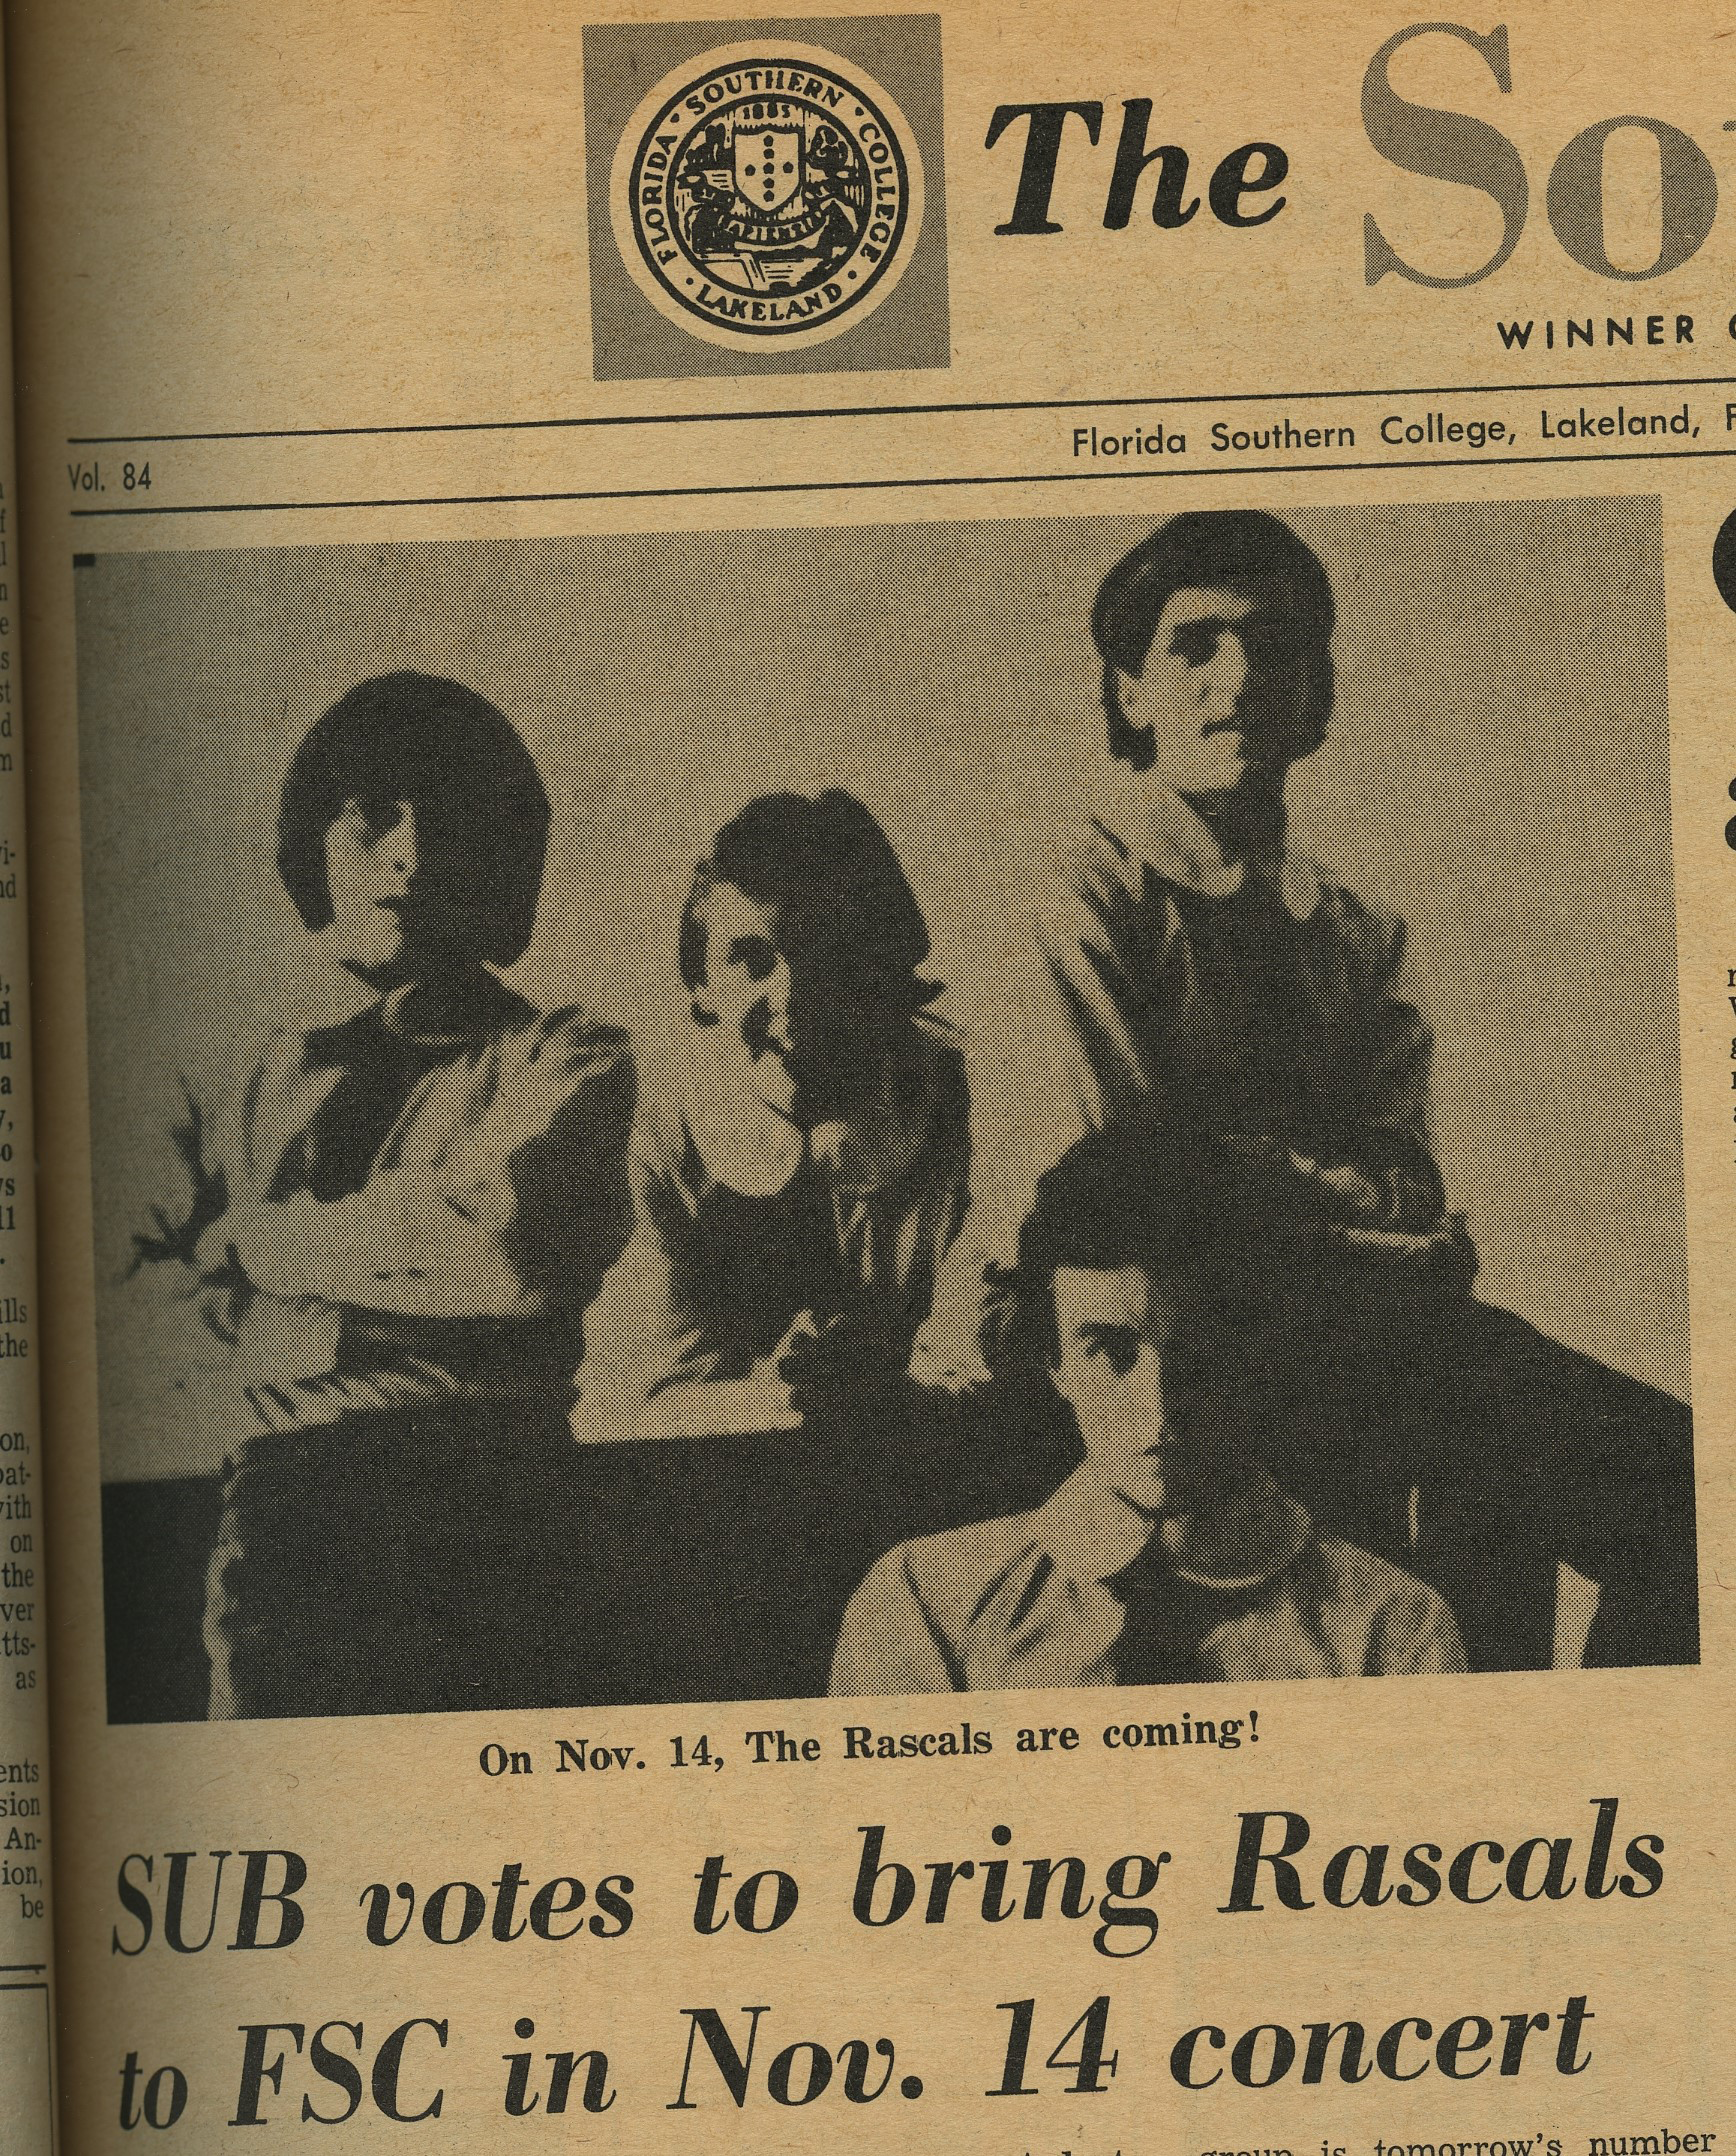 The So.. Winner Vol. 84 Florida Southern College, Lakeland, On Nov. 14, The Rascals are coming! SUB votes to bring Rascals to FSC in Nov. 14 concert